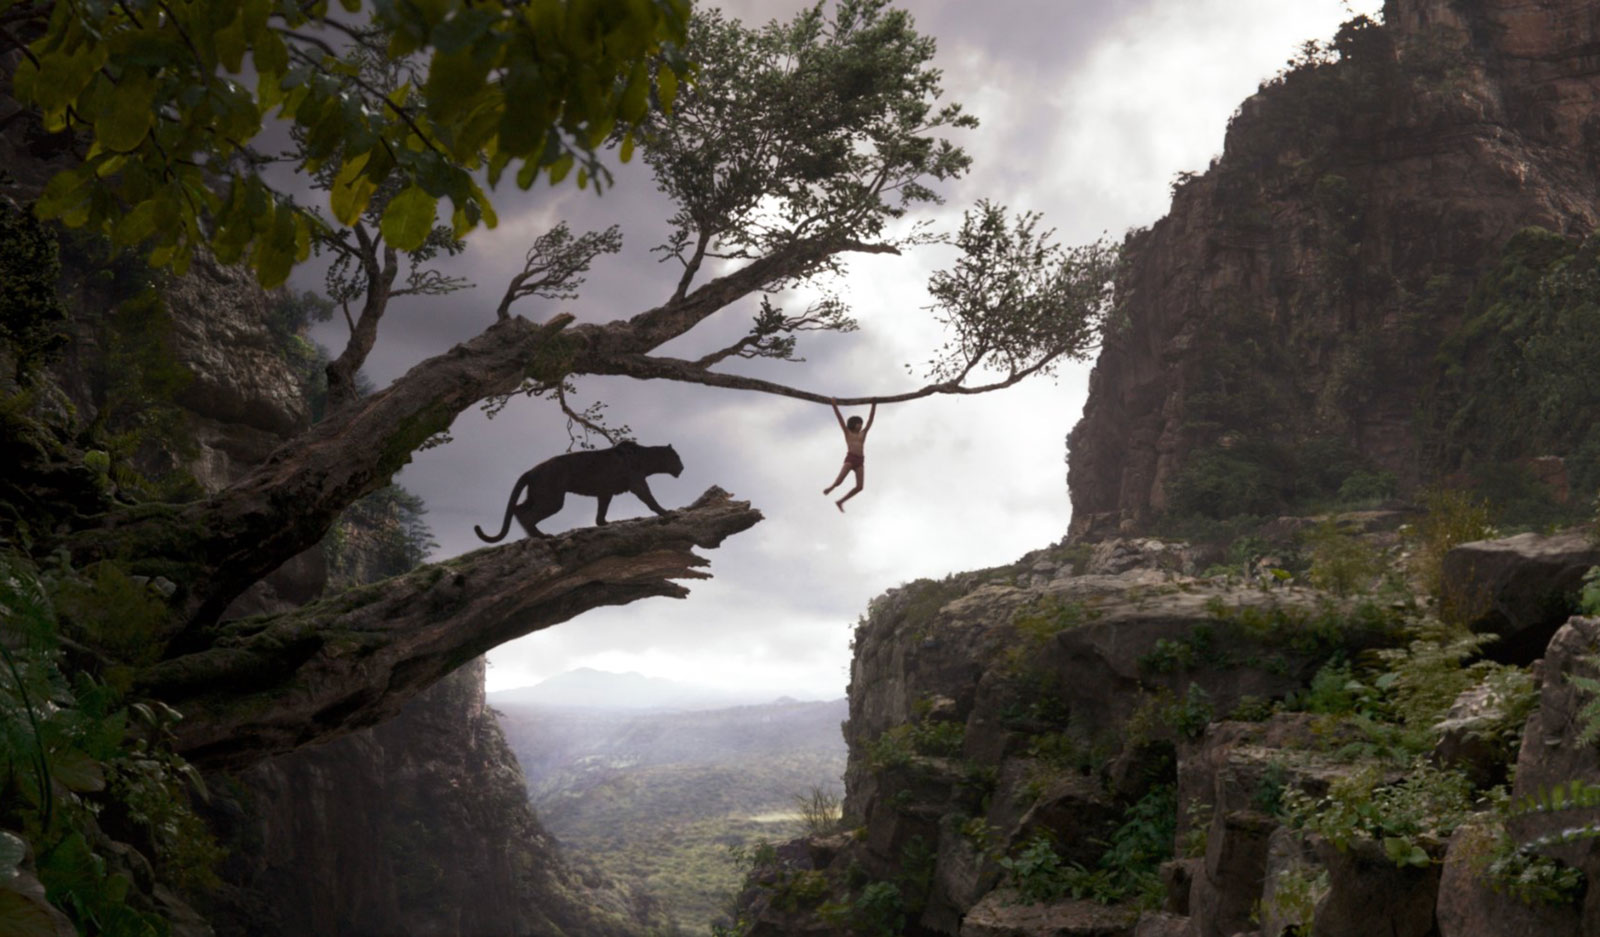 Bagheera, voiced by Ben Kingsley, and Mowgli, played by Neel Sethi, in Jon Favreau's The Jungle Book, 2016